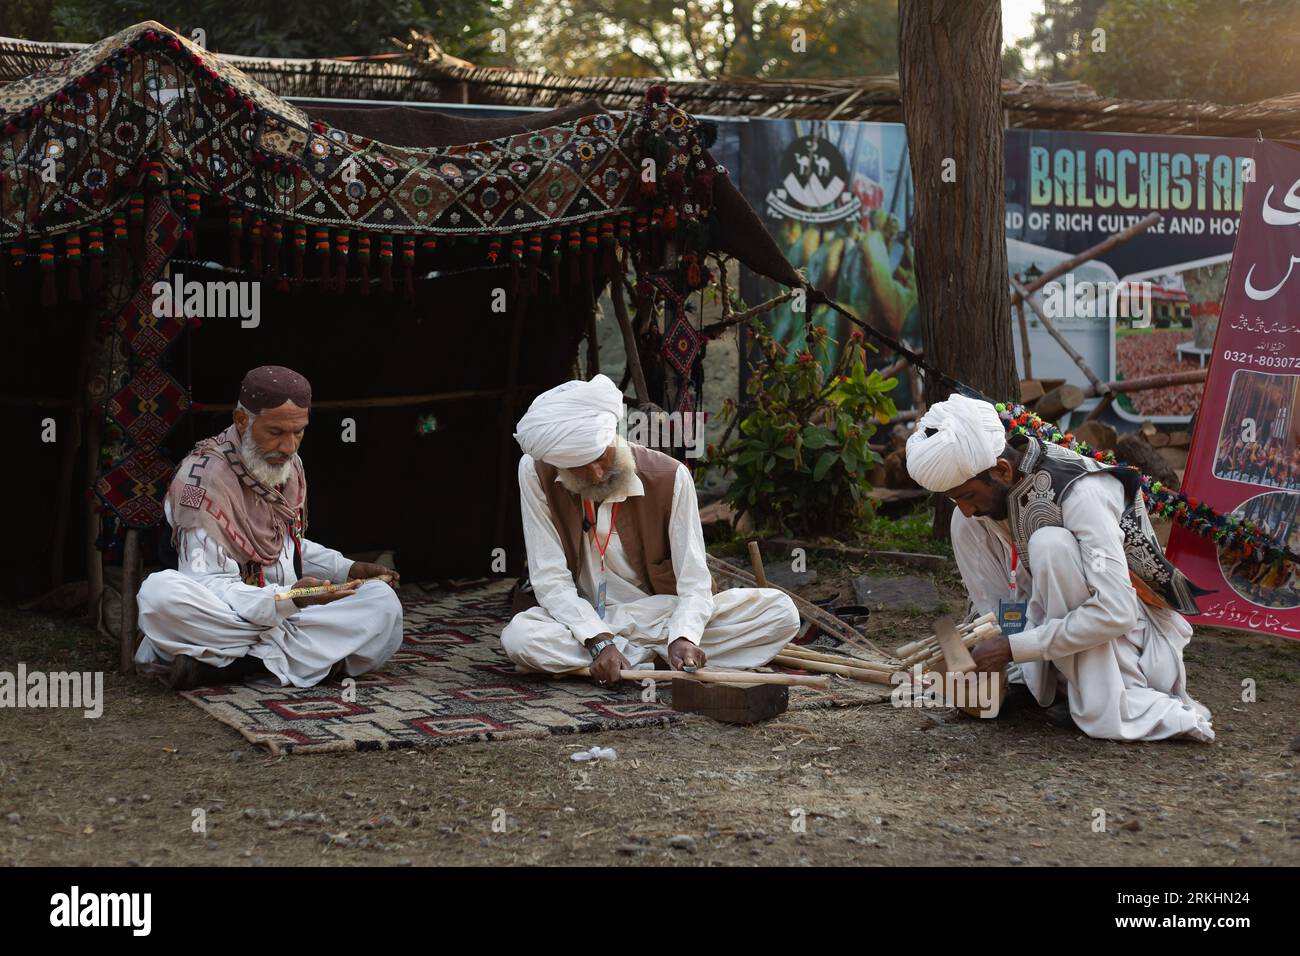 The people in turbans sitting on a rug outdoors at Lok mela in Islamabad, Pakistan Stock Photo